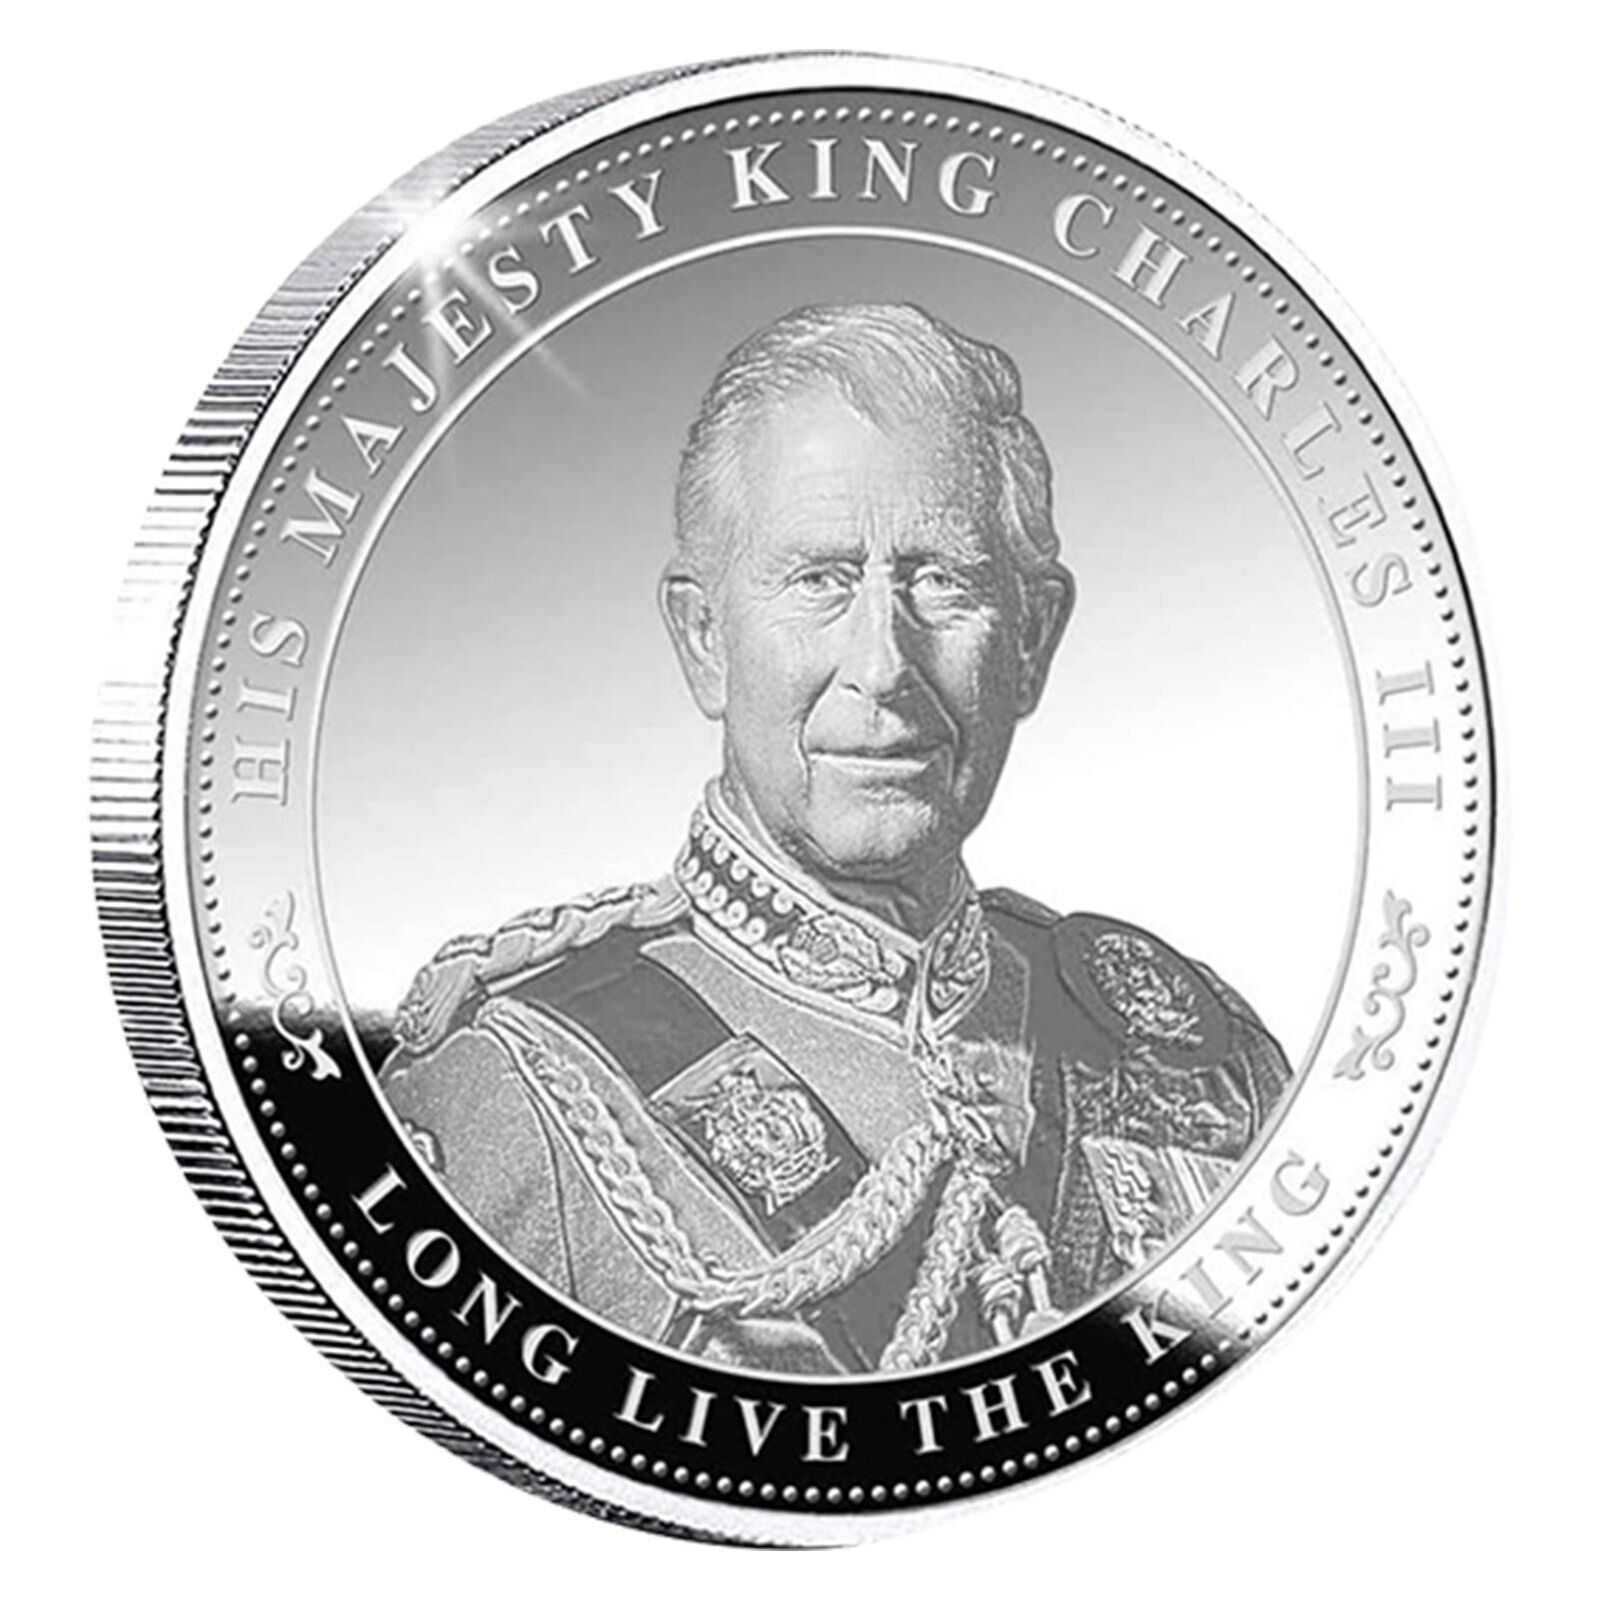 King Charles III Metal Commemorative Coin British Royal Challenge Coins 2023